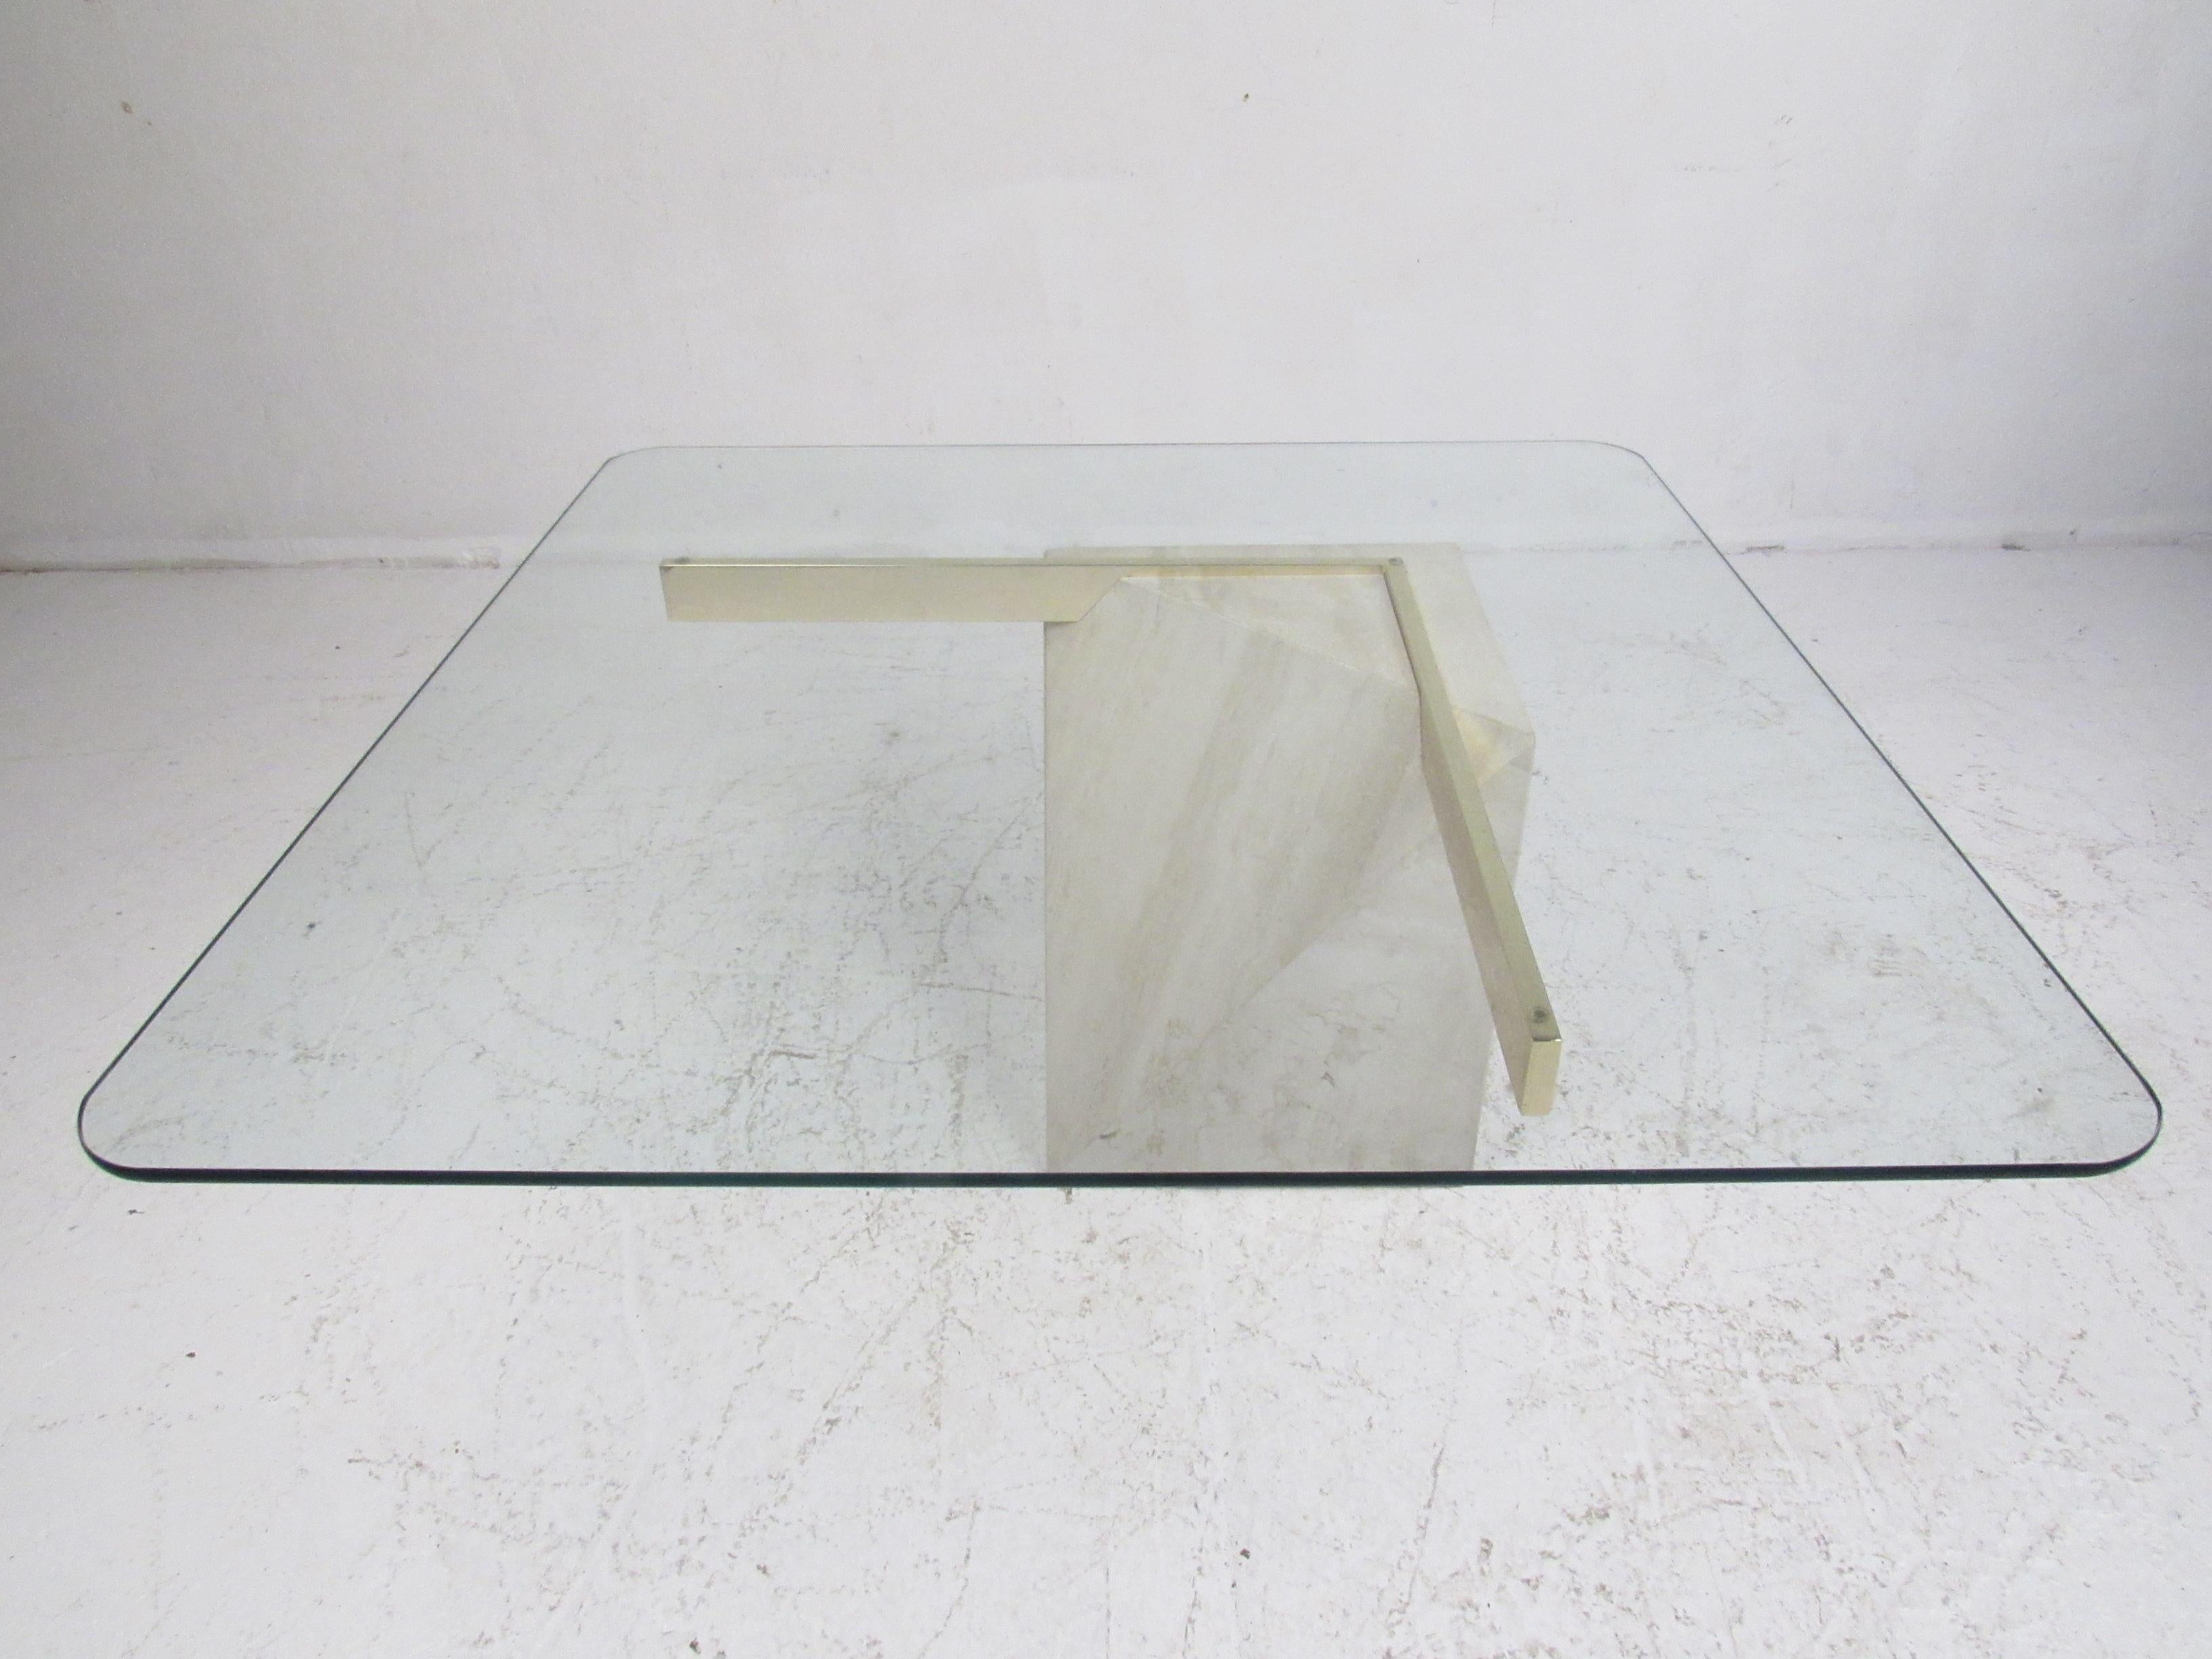 This wonderful vintage modern cocktail table features a unique travertine base with brass plated bars supporting a thick glass top. The geometric shaped base allows the glass top to appear as if it's floating on one side. An elegant Italian design